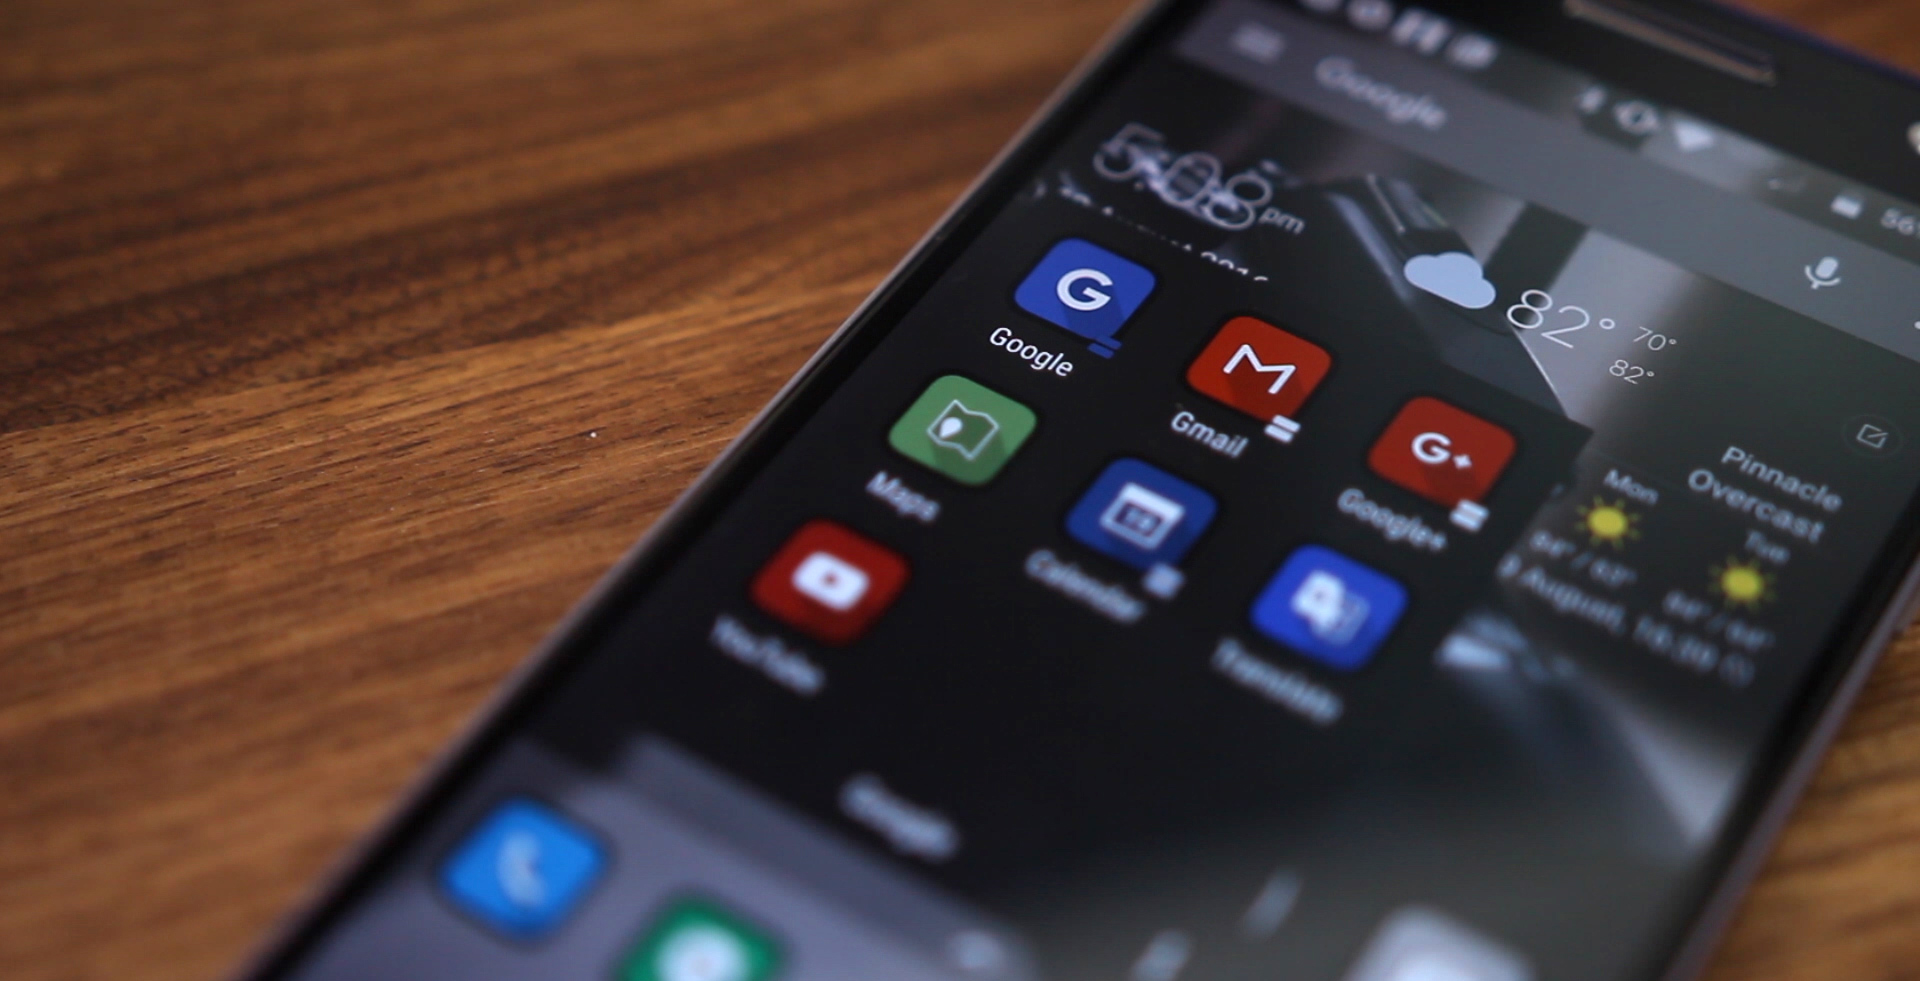 Hands-on with 5 Android apps you should download in August 2016 [Video]